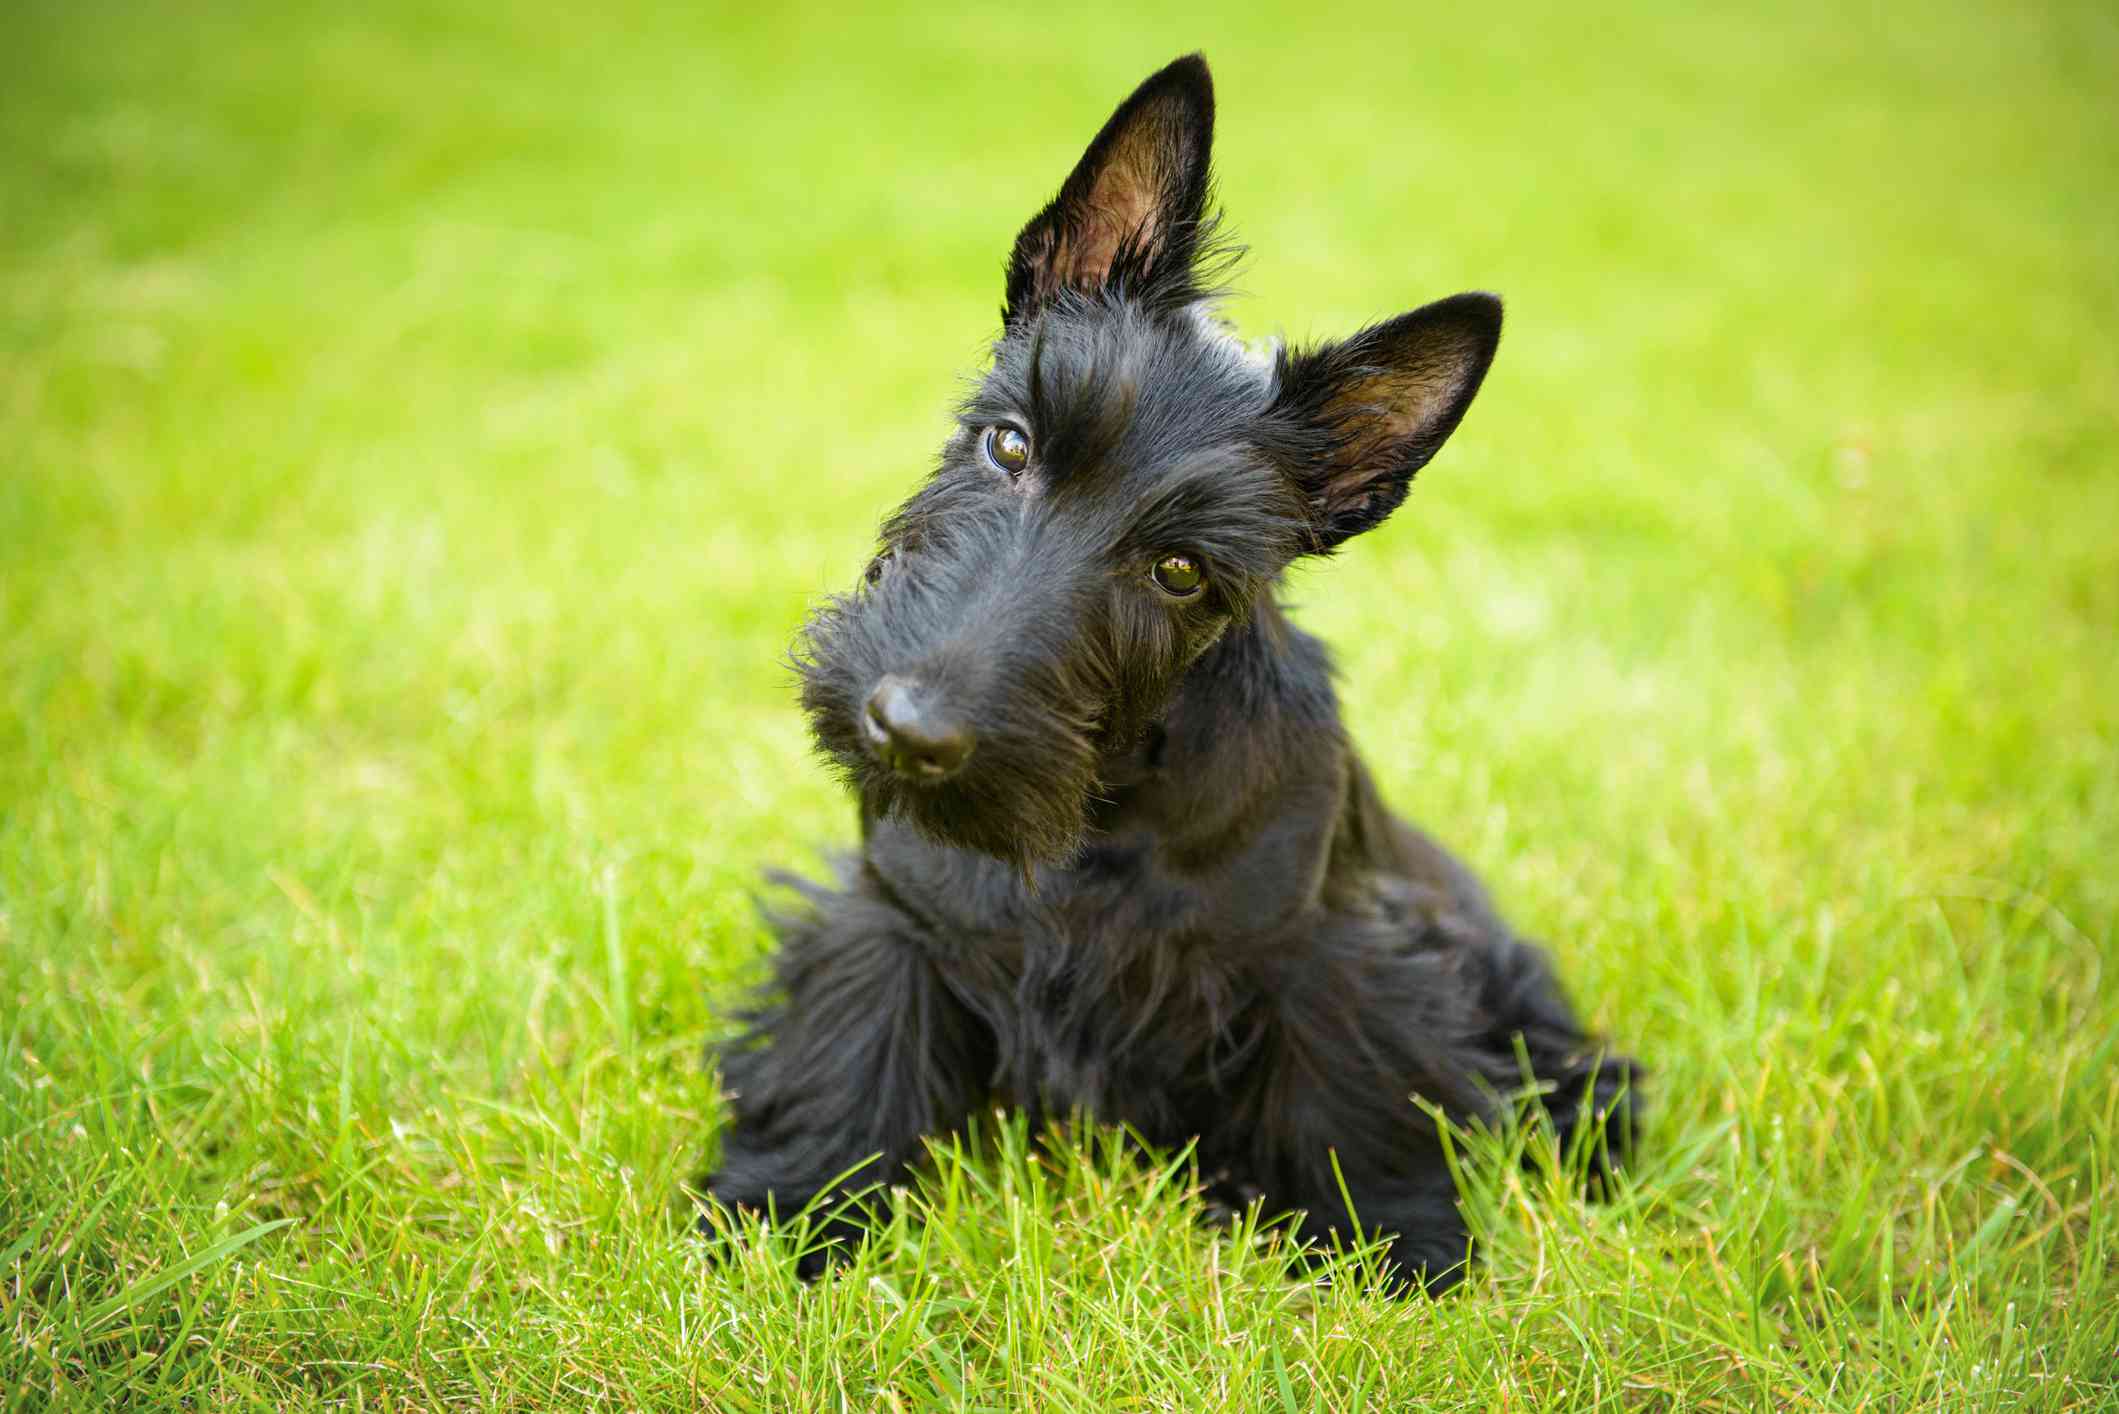 Scottish Terrier in the grass with head tilted looking at camera.